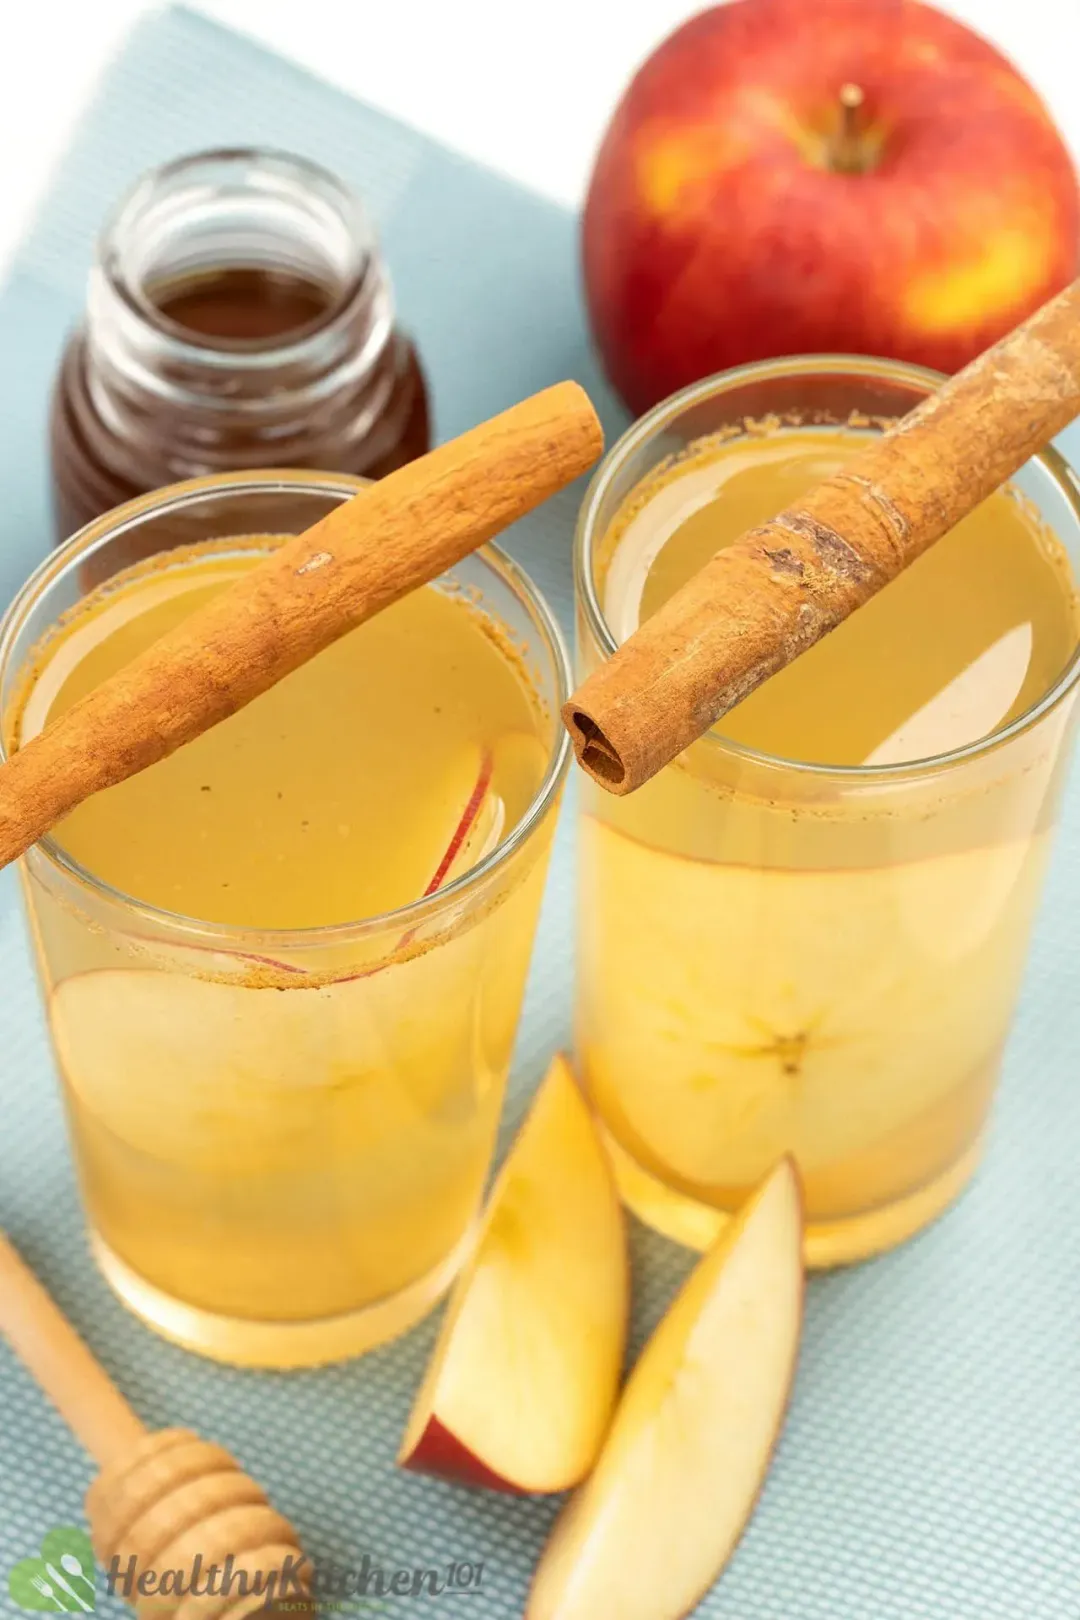 Shot glasses with cinnamon sticks on top, apple wedges on the side, and an apple in the back